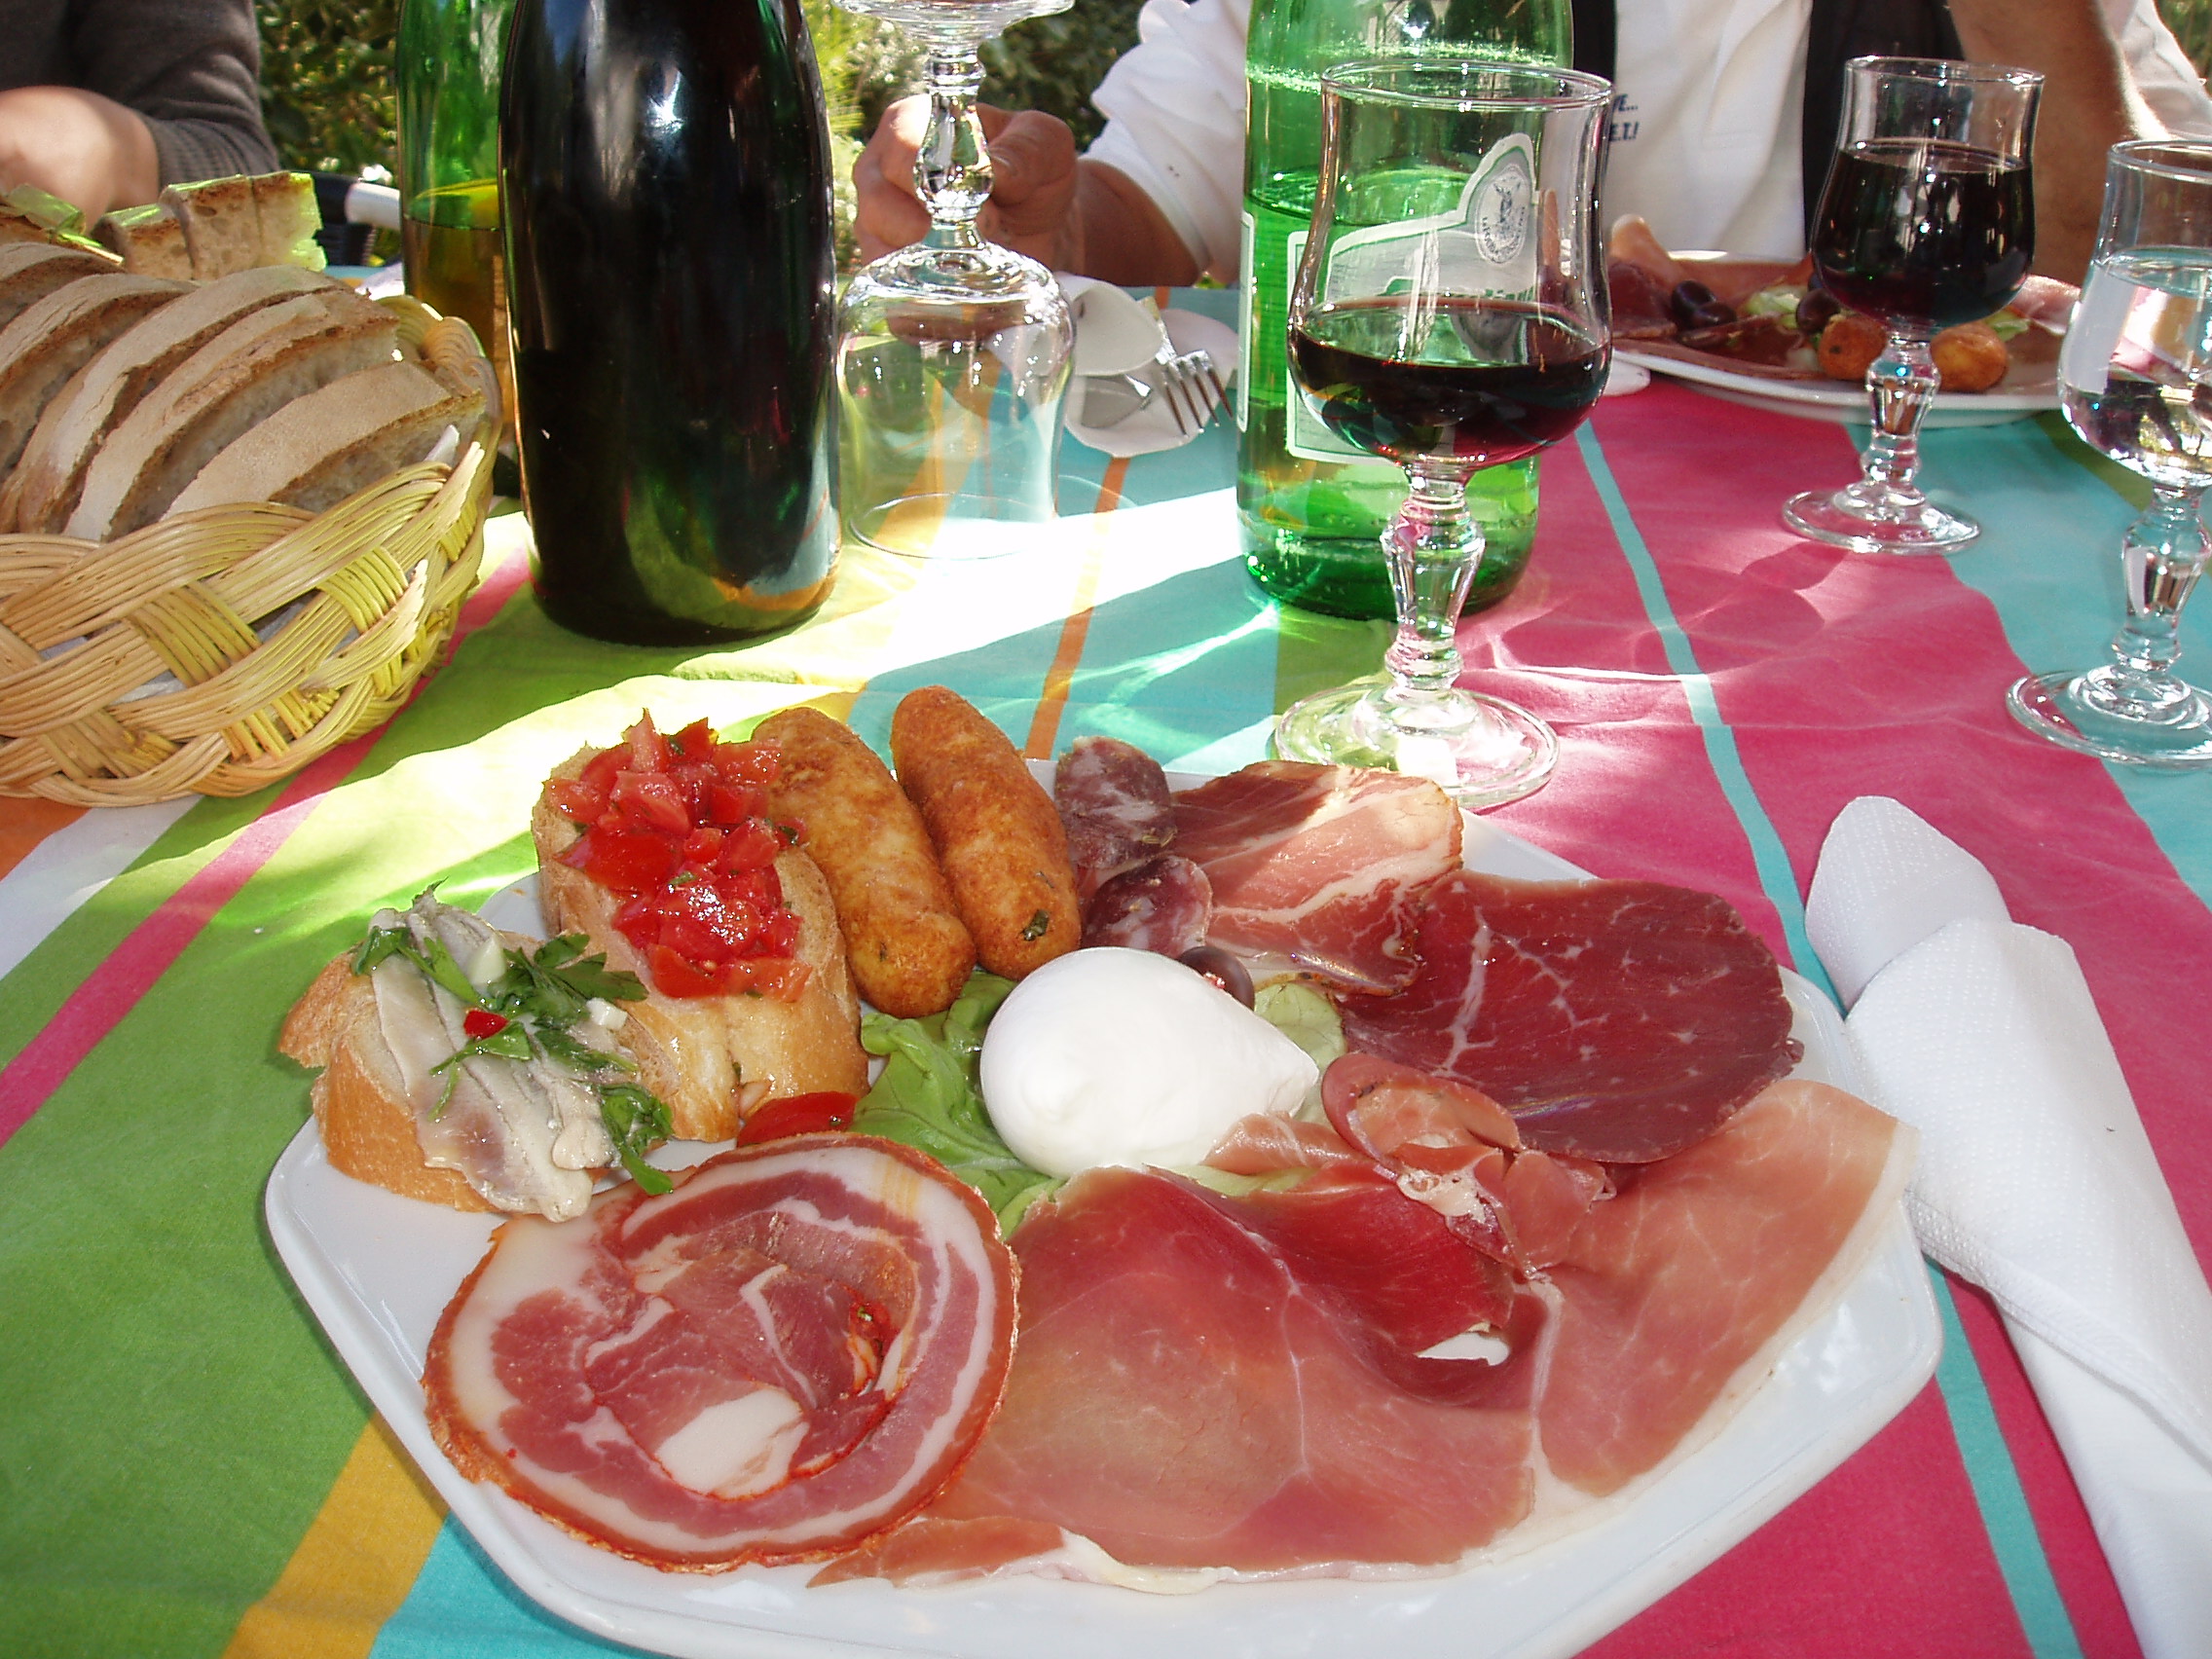 Not your average picnic lunch at I Moresani